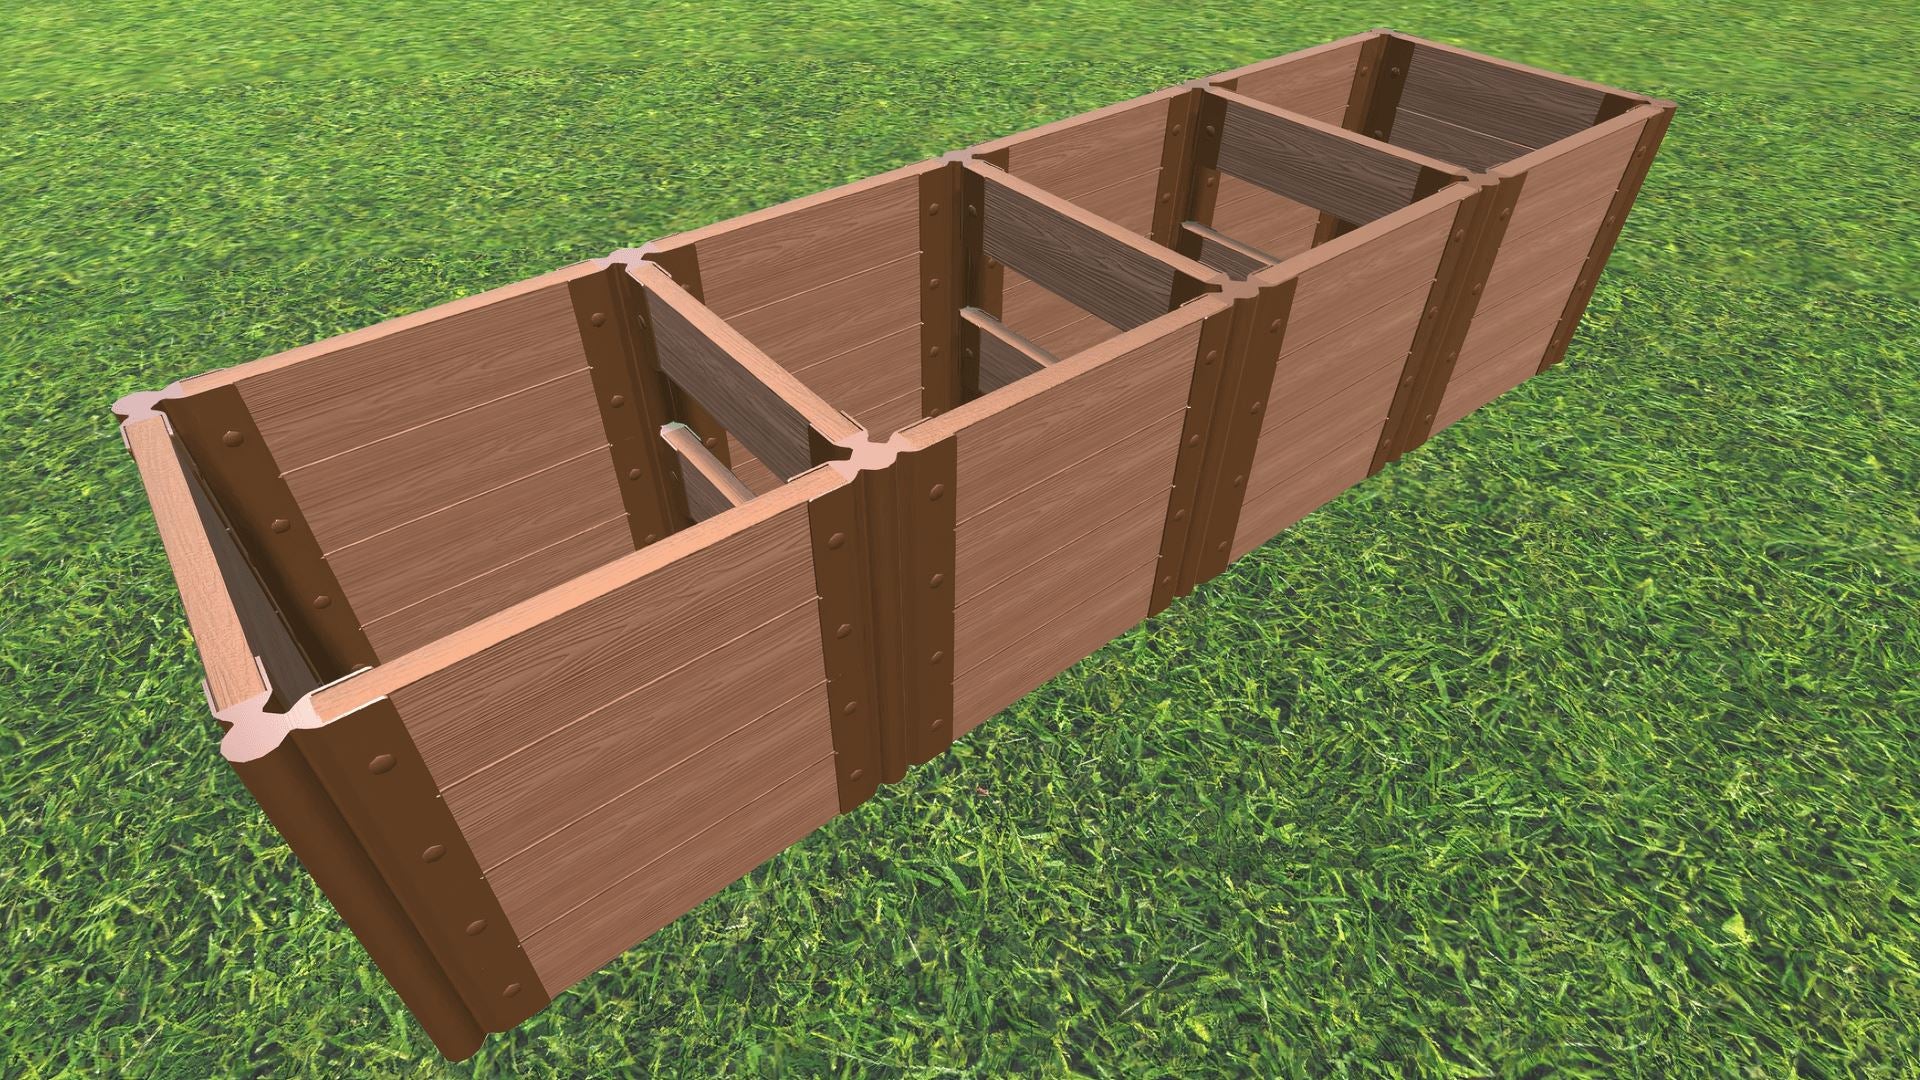 Tool-Free 2' x 8' Raised Garden Bed (2' Sections) Raised Bed Planters Frame It All Classic Sienna 2" 4 = 22"